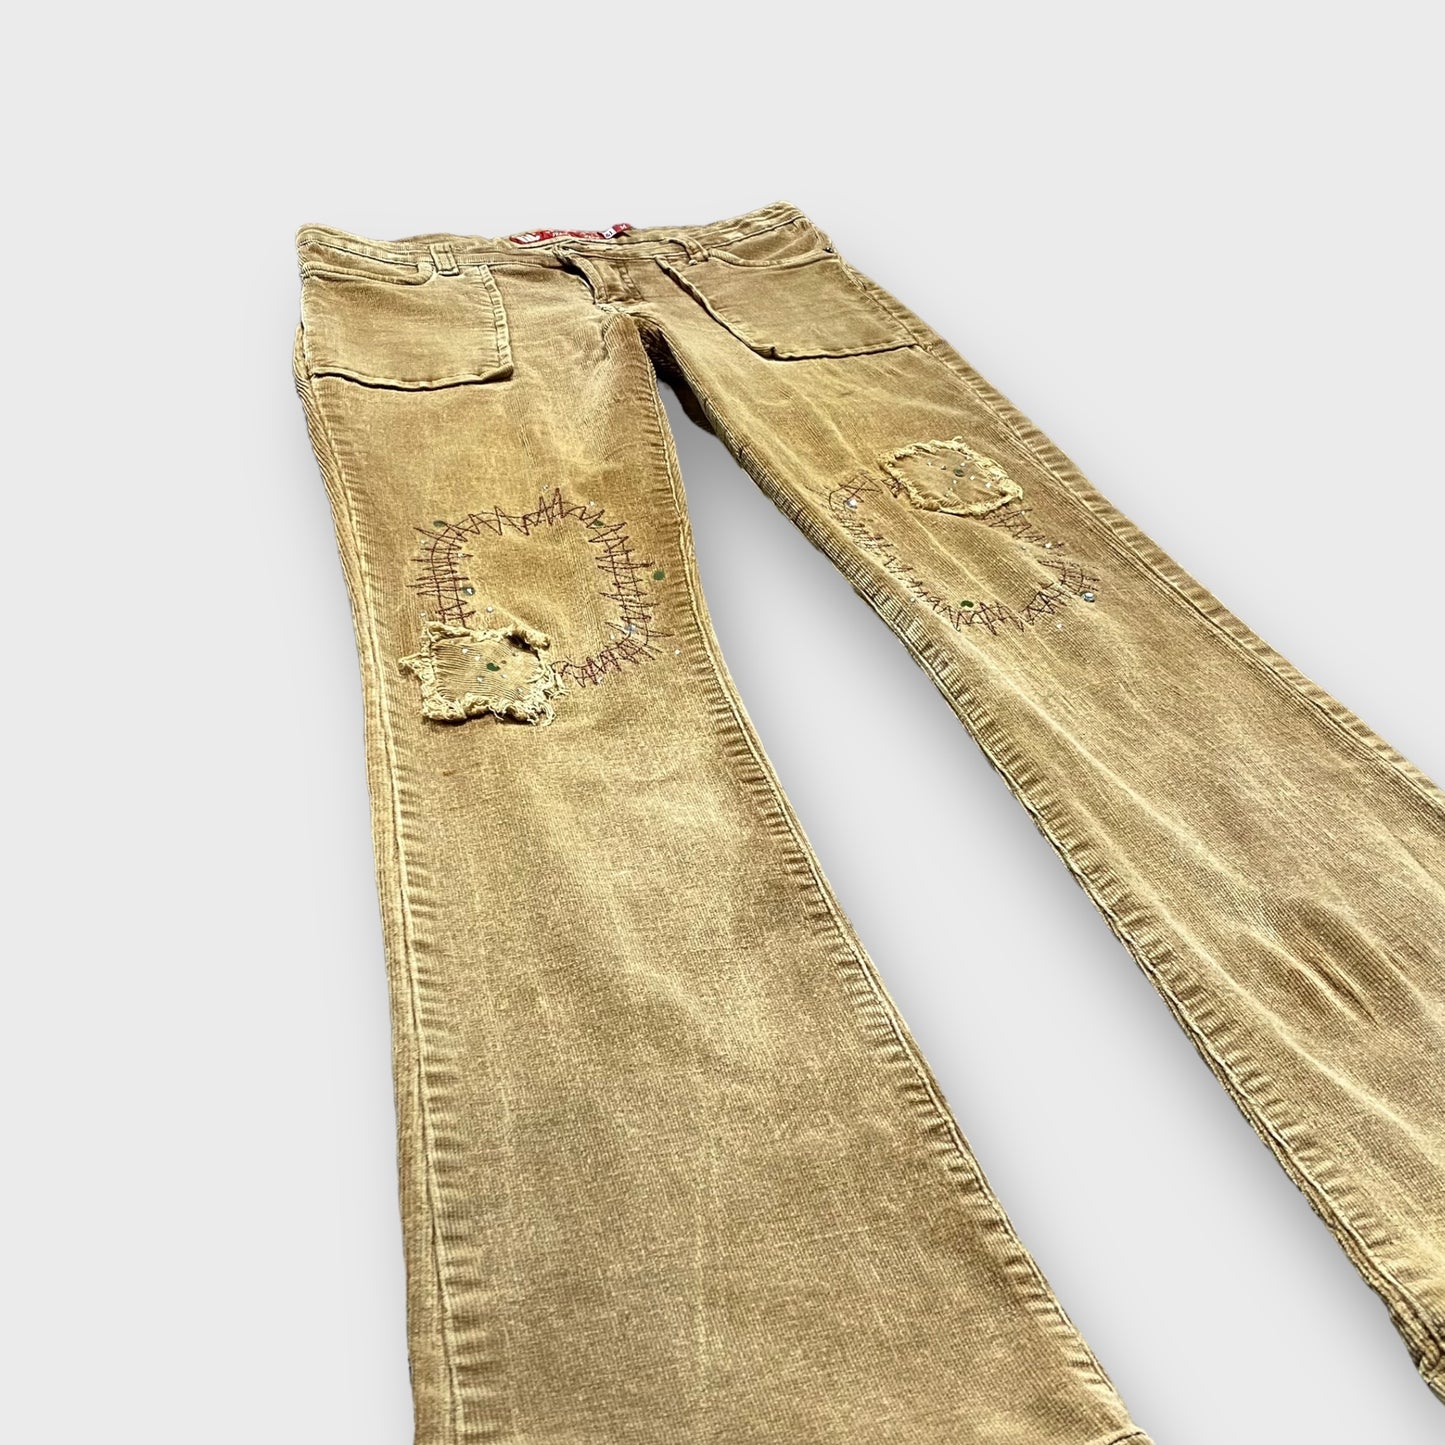 "MISS LILY" Corduroy flare pants